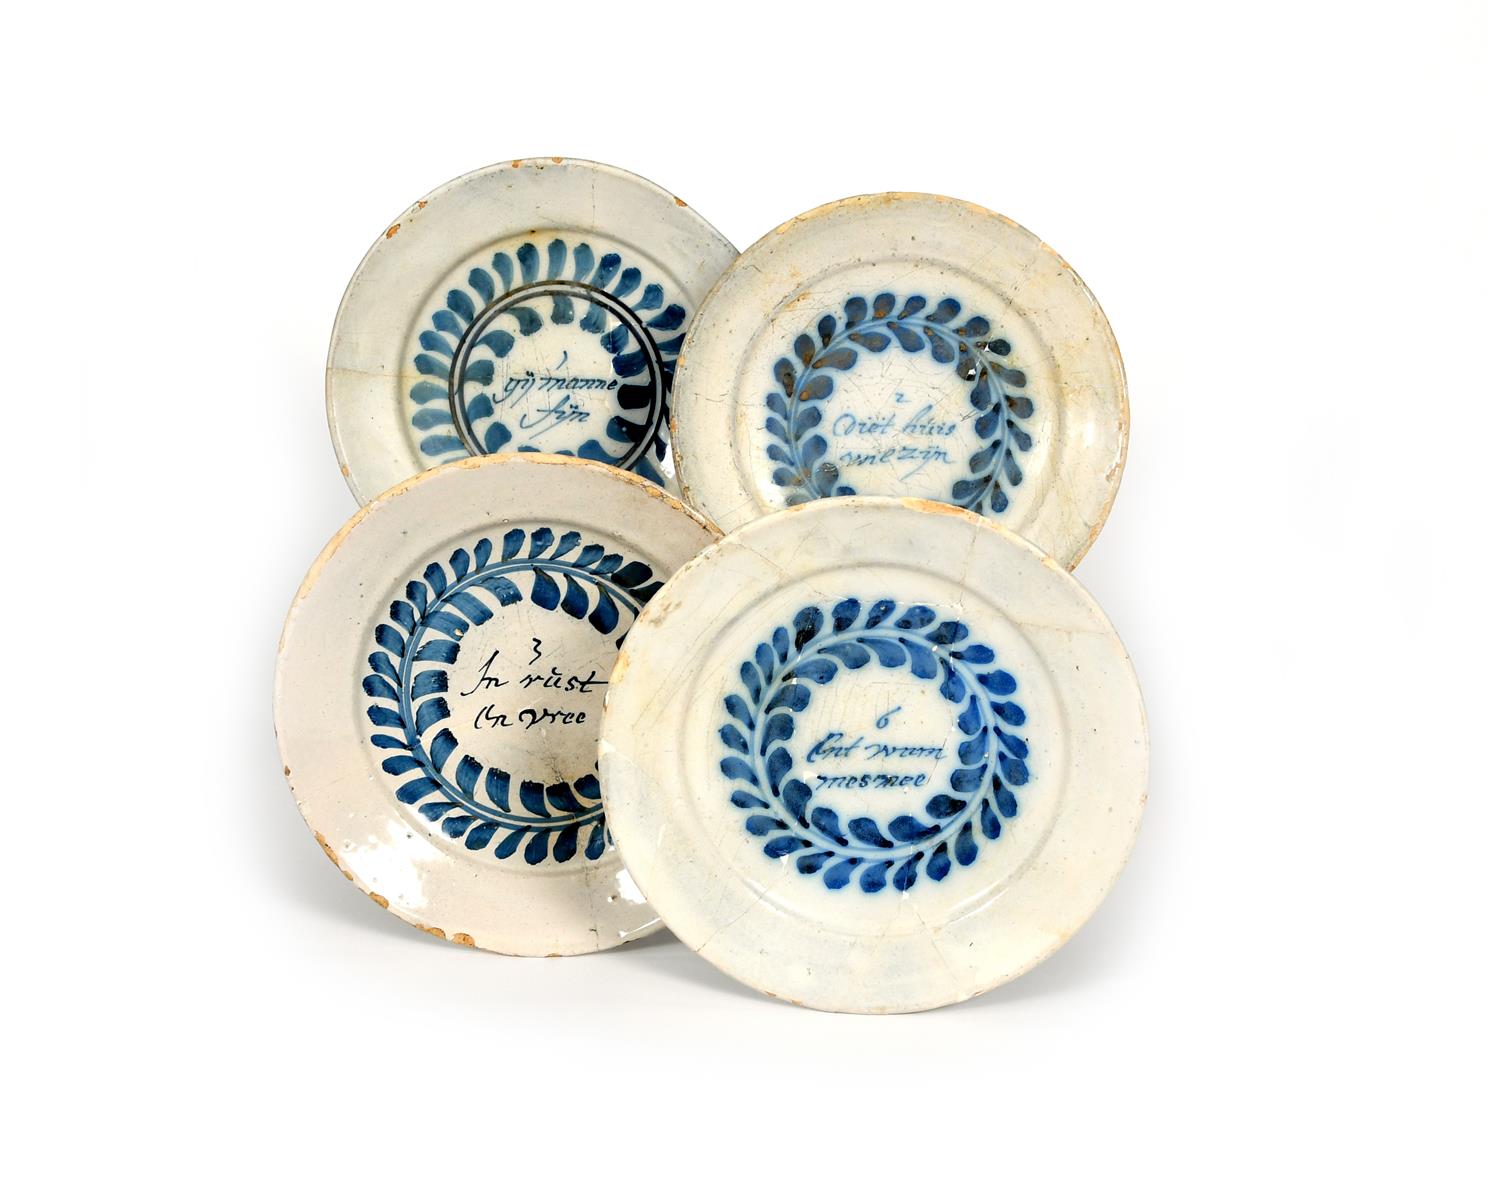 Four Delft 'Merry Man' plates, late 17th century, each well inscribed in Dutch with a line from